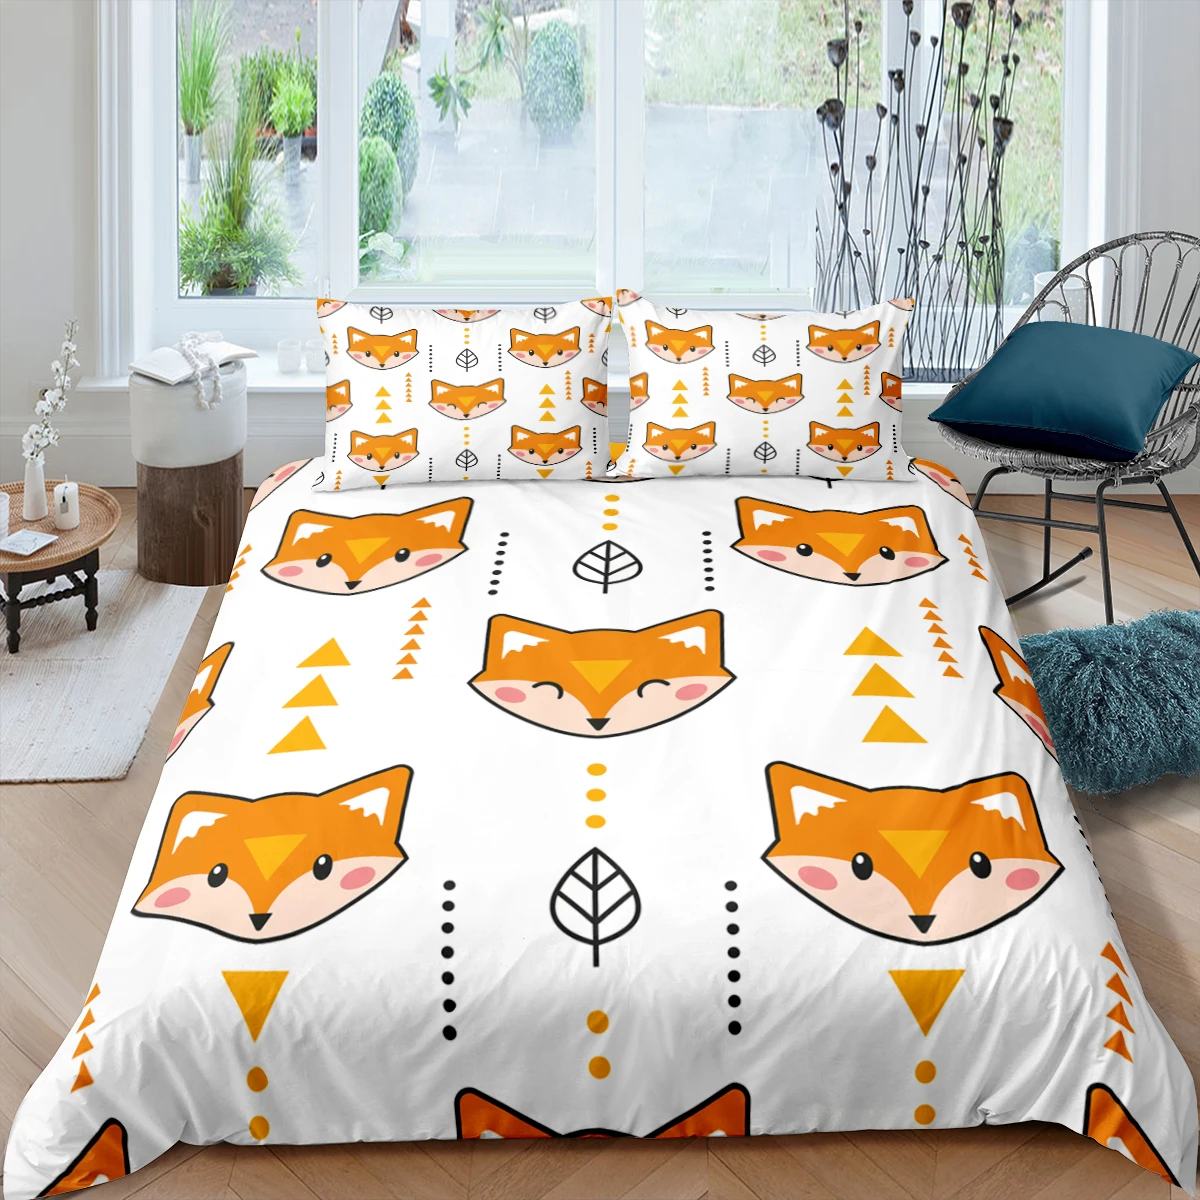 Home Textiles Luxury 3D Cartoon Fox Duvet Cover Set Pillowcase Animals Bedding Set Queen and King Size Comforter Bedding Sets best bed sheets